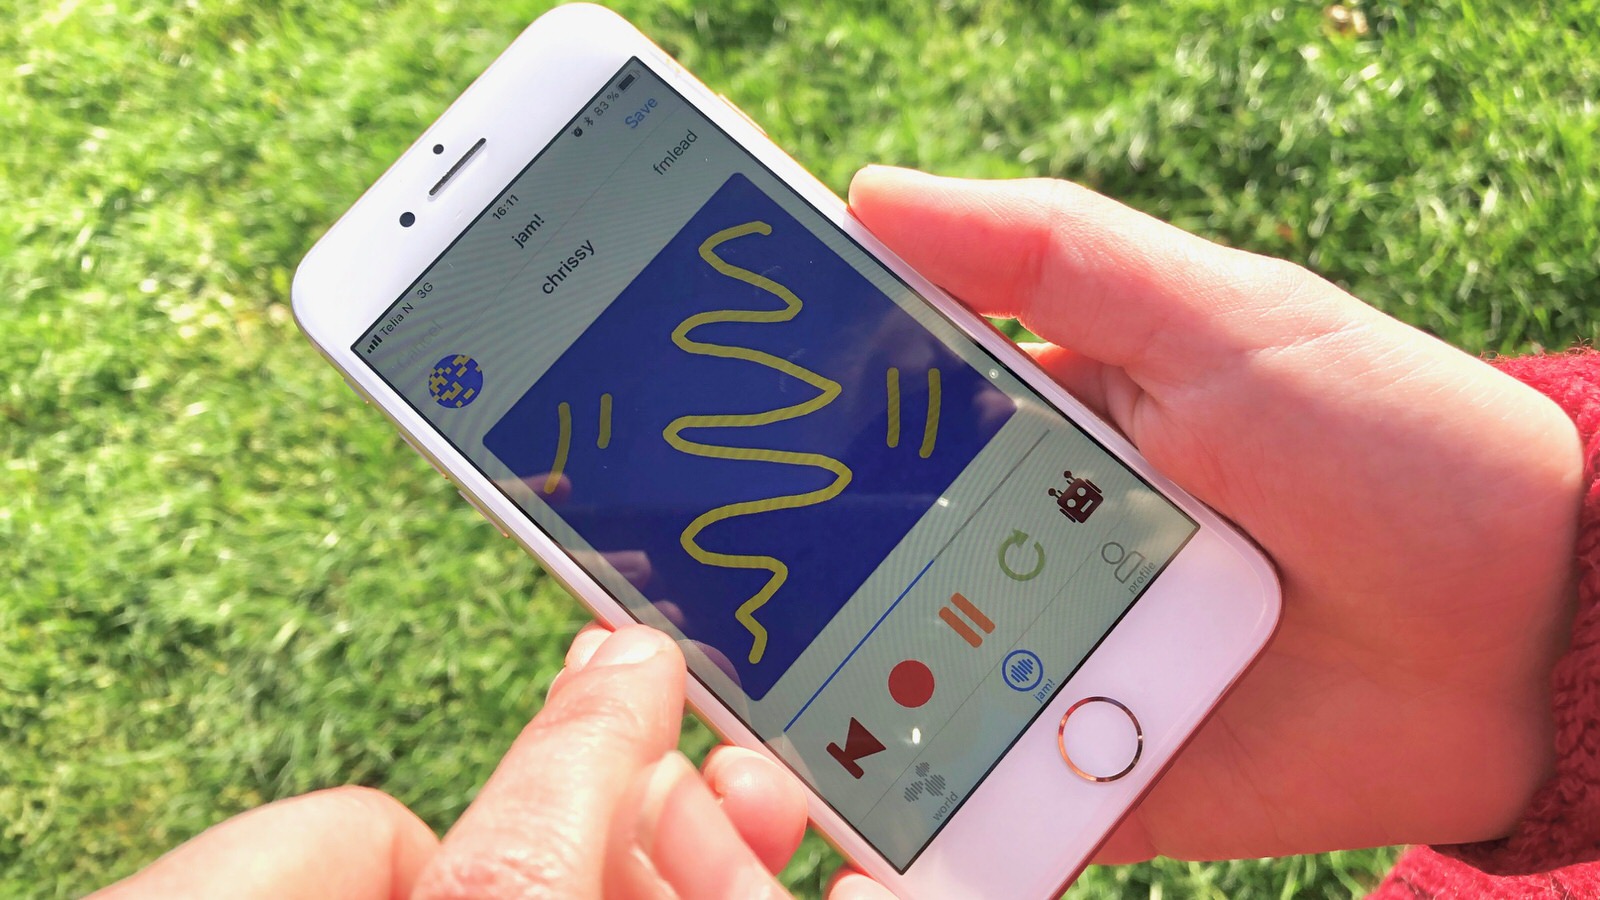 Creating music outdoors with microjam on iPhones